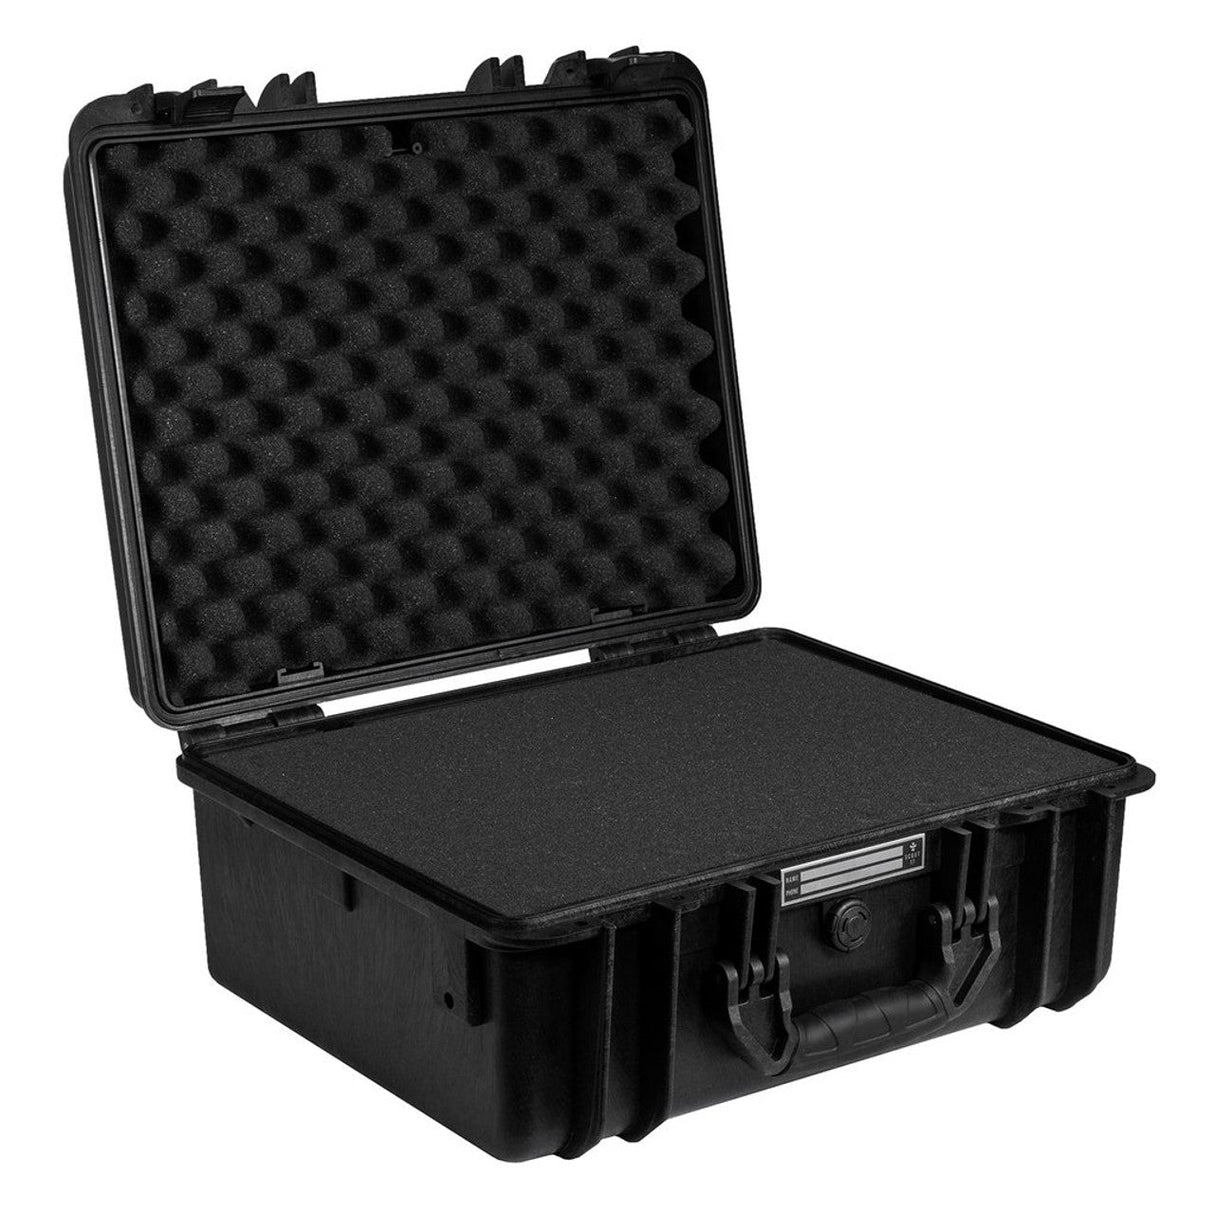 Revelry Supply - The Scout 17" Hard Case open view showcasing interior padding and durable exterior